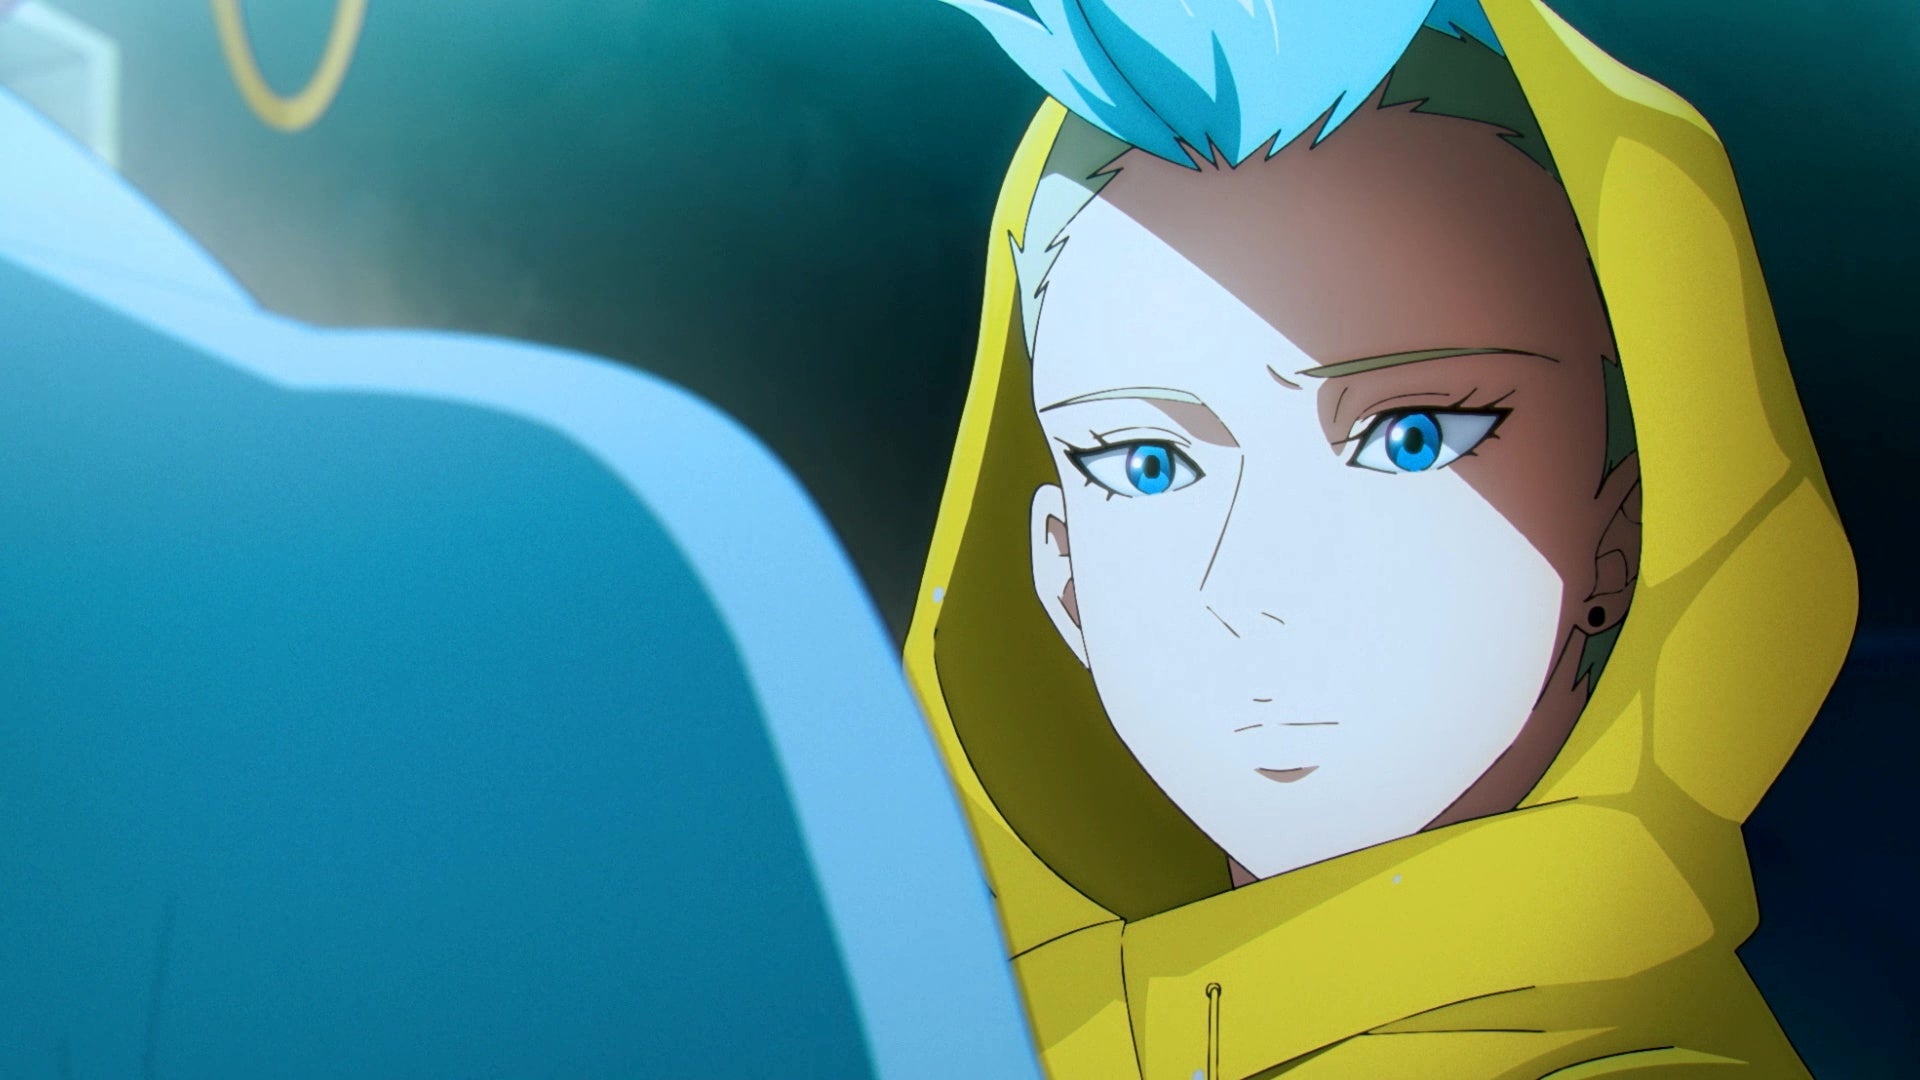 A blue haired woman wearing a yellow jacket with the hood pulled over her head looks at a police officer whose face is off-camera. It's an anime cutscene from Wanted: Dead.